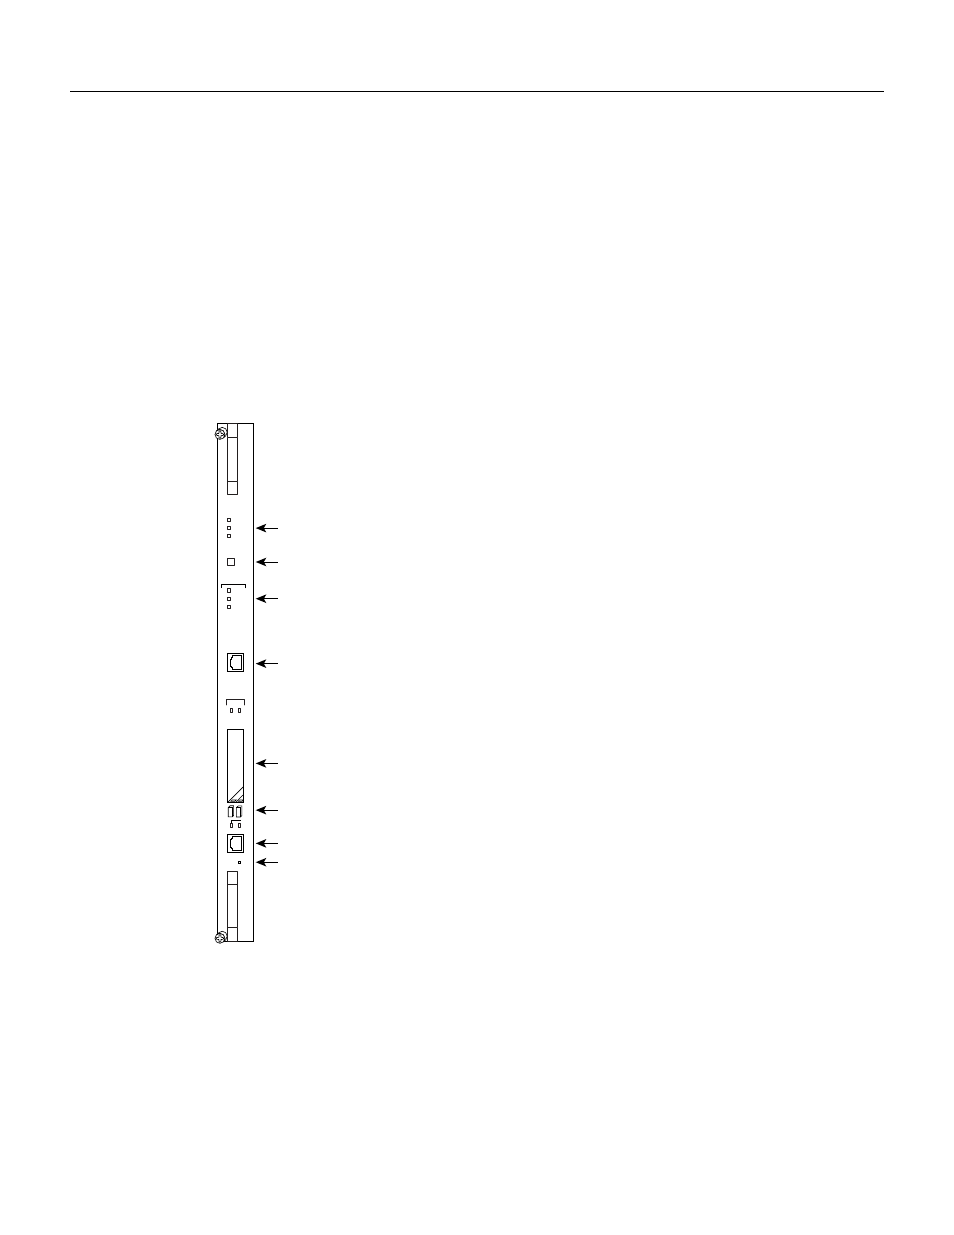 2 physical description, Aco switch, Figure 1-9 mpc faceplate | Cisco 6200 User Manual | Page 19 / 32